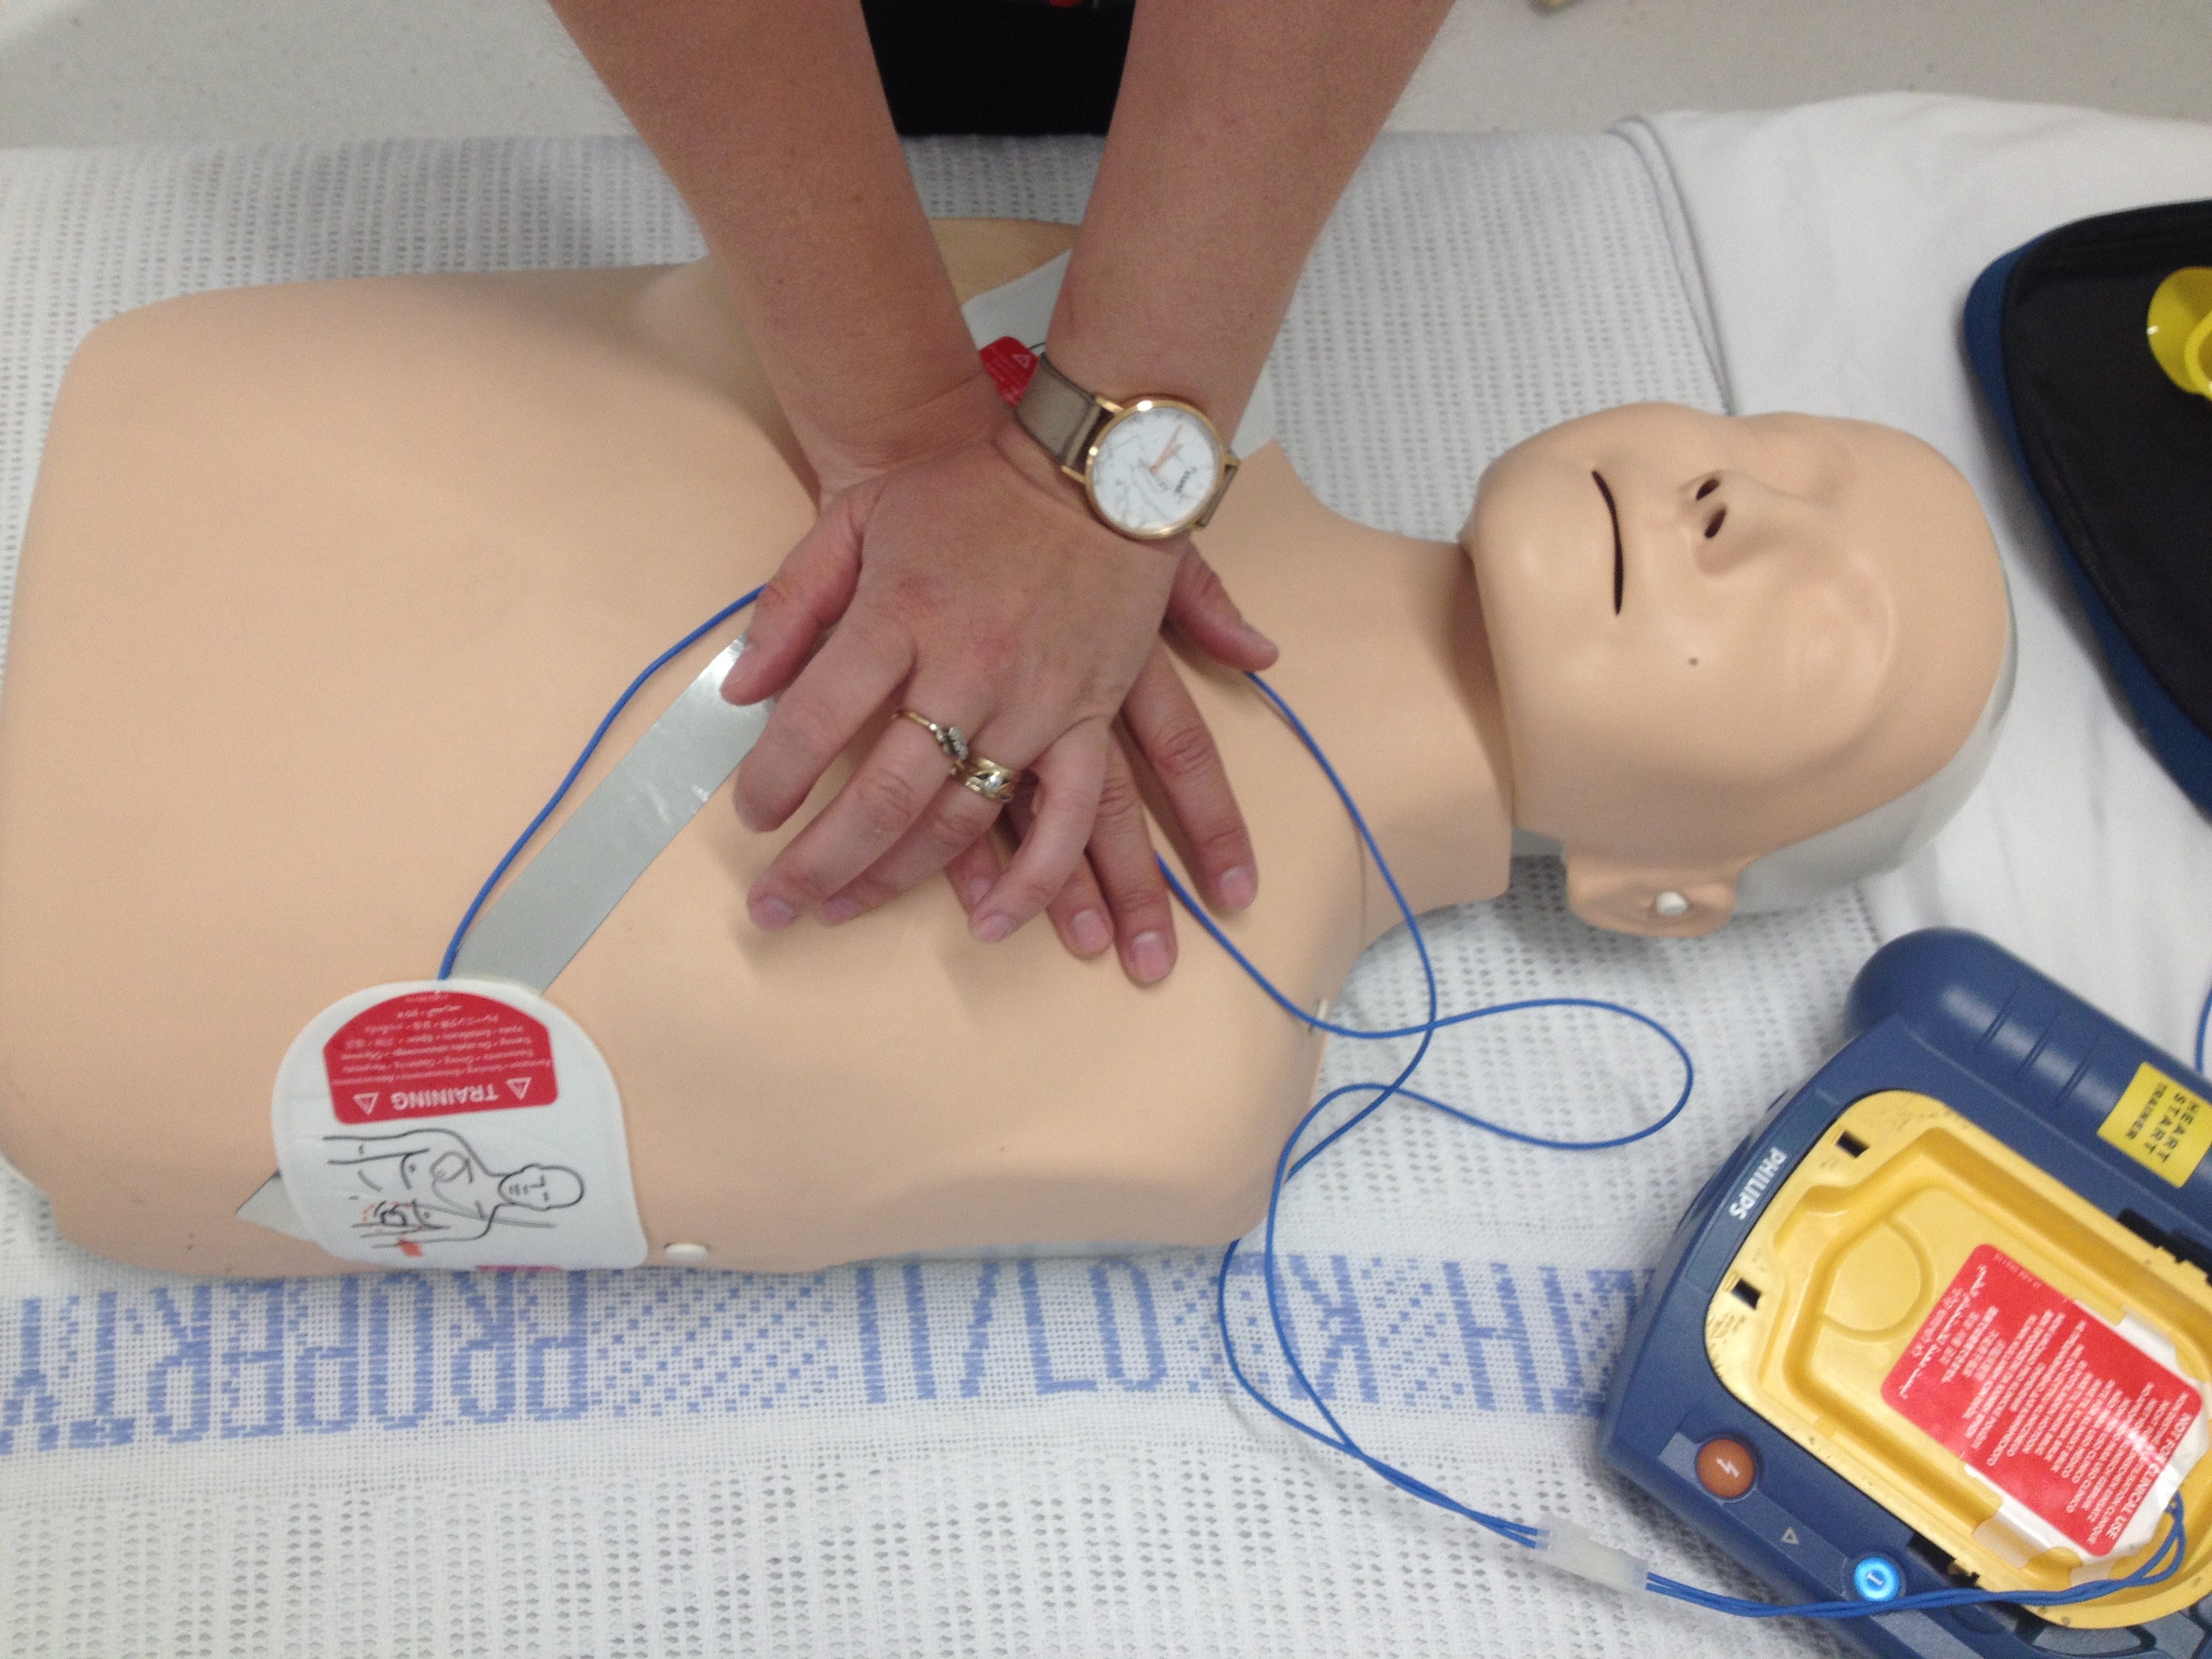 Defibs are popping up everywhere, here's what you need to know about using one